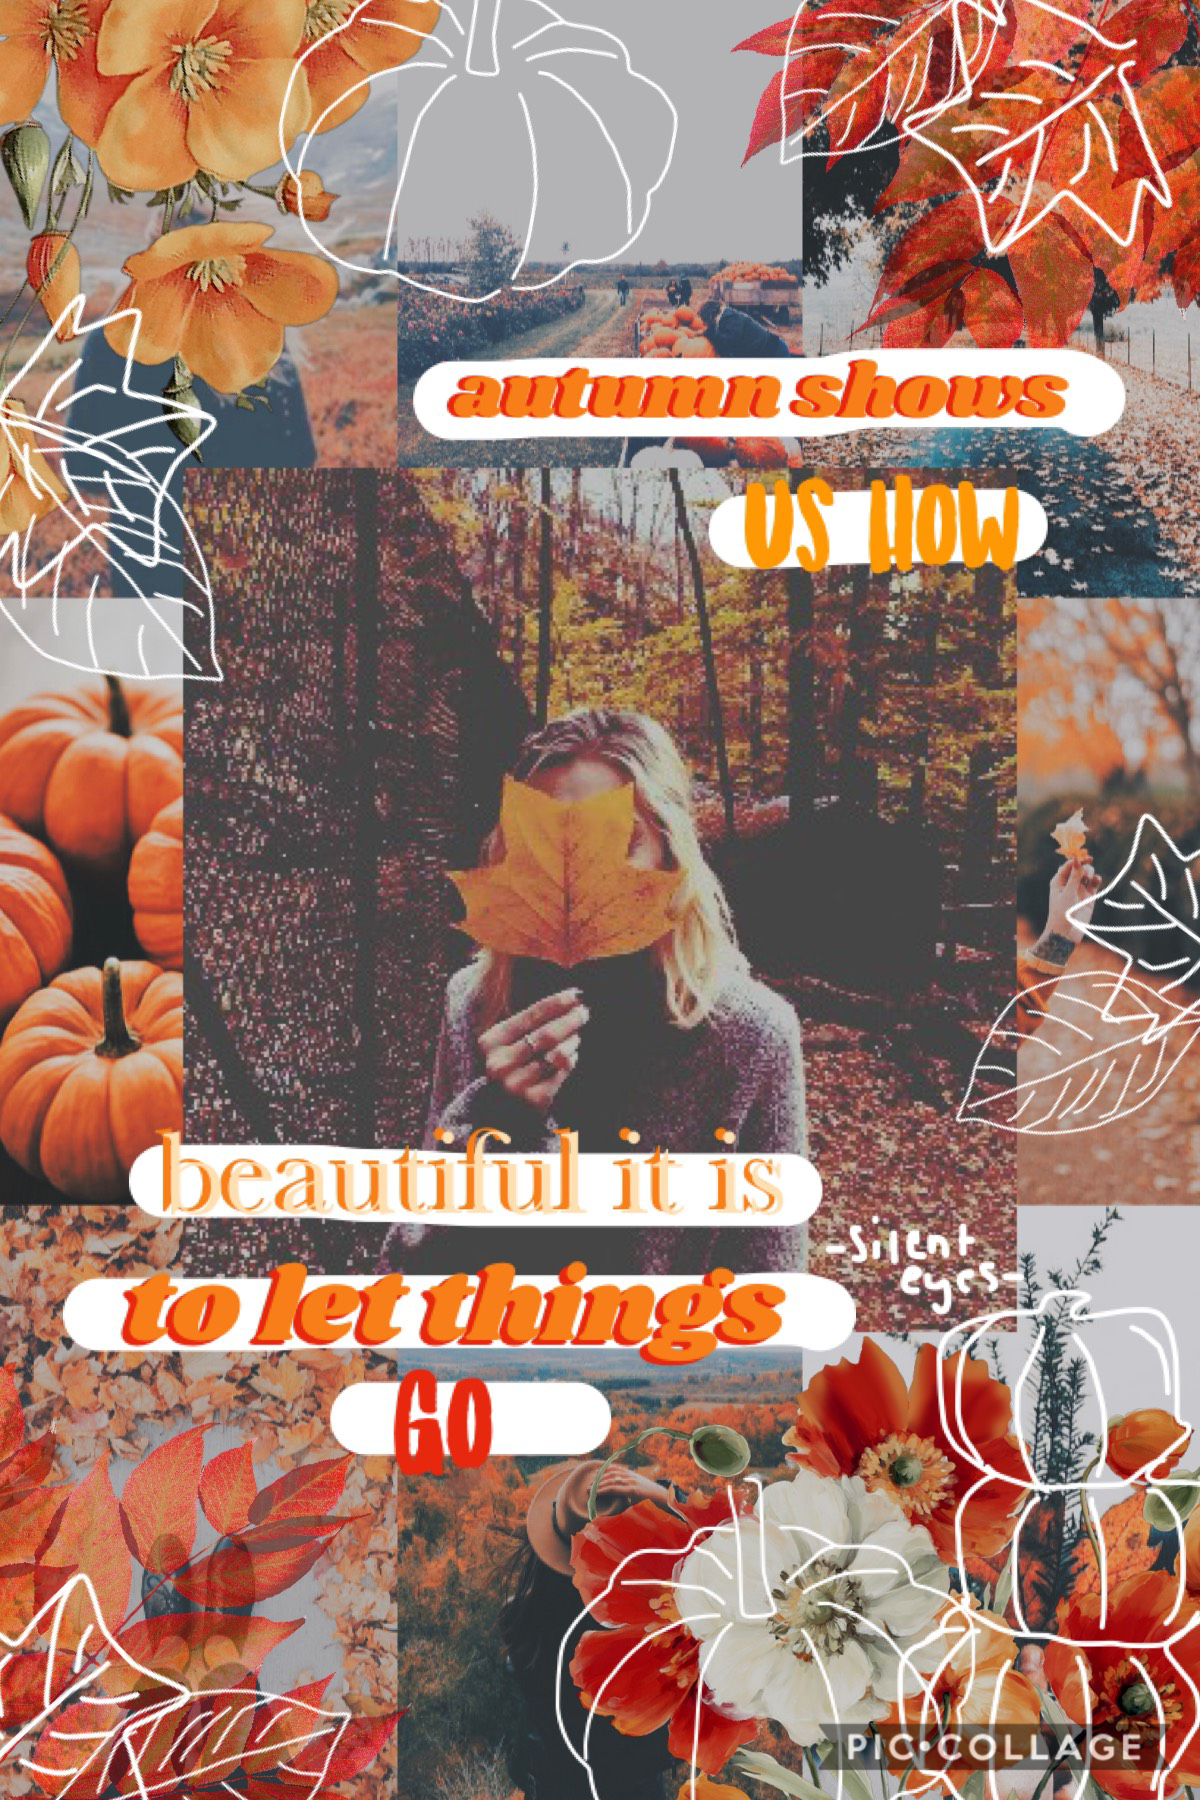 ╰☆☆ 𝕥𝕒𝕡 ☆☆╮
hi again! 2 edits in a day lol that never happens for me. Well happy autumn i think. I tried a new style that i’ve seen floating around PC.
𝕢 𝕠 𝕥 𝕕: Favorite season
𝕒 𝕠 𝕥 𝕕: definitely fall, i love wearing sweaters and i love the weather